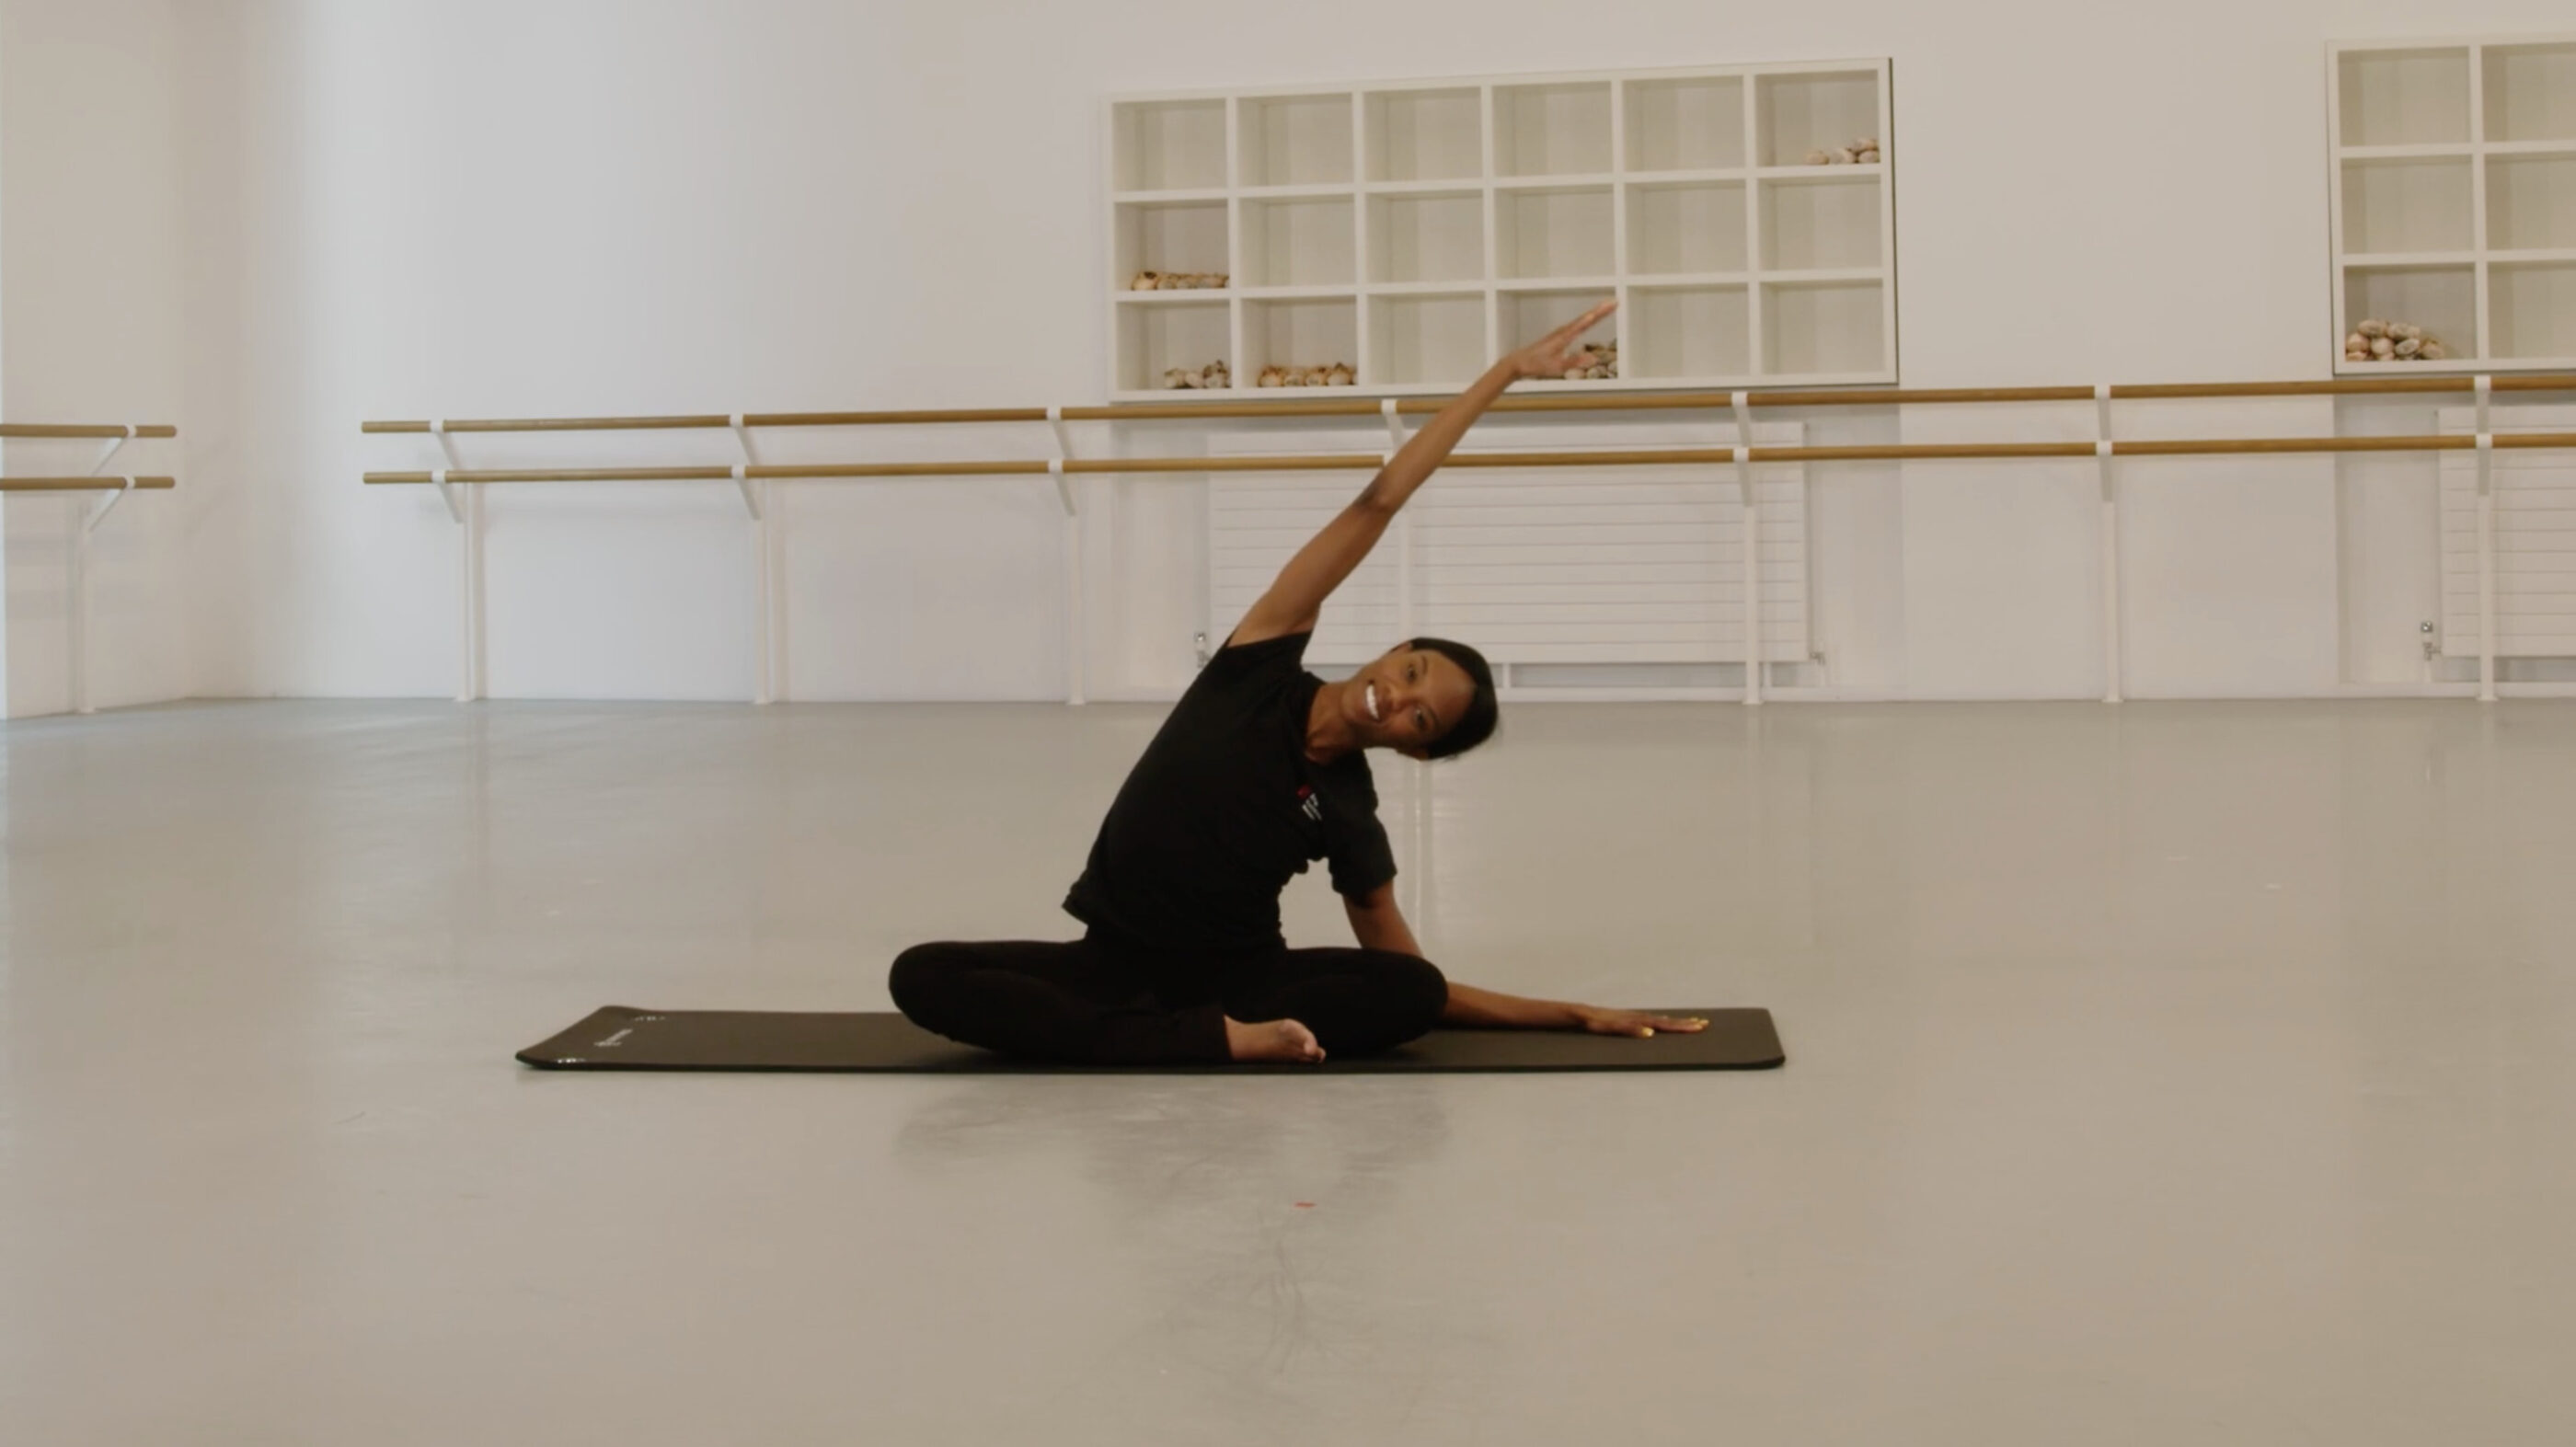 A dance teacher is sitting on a yoga mat in a dance studio. Her legs are folded and she is stretching to the side. She is wearing a black t-shirt and black trousers.